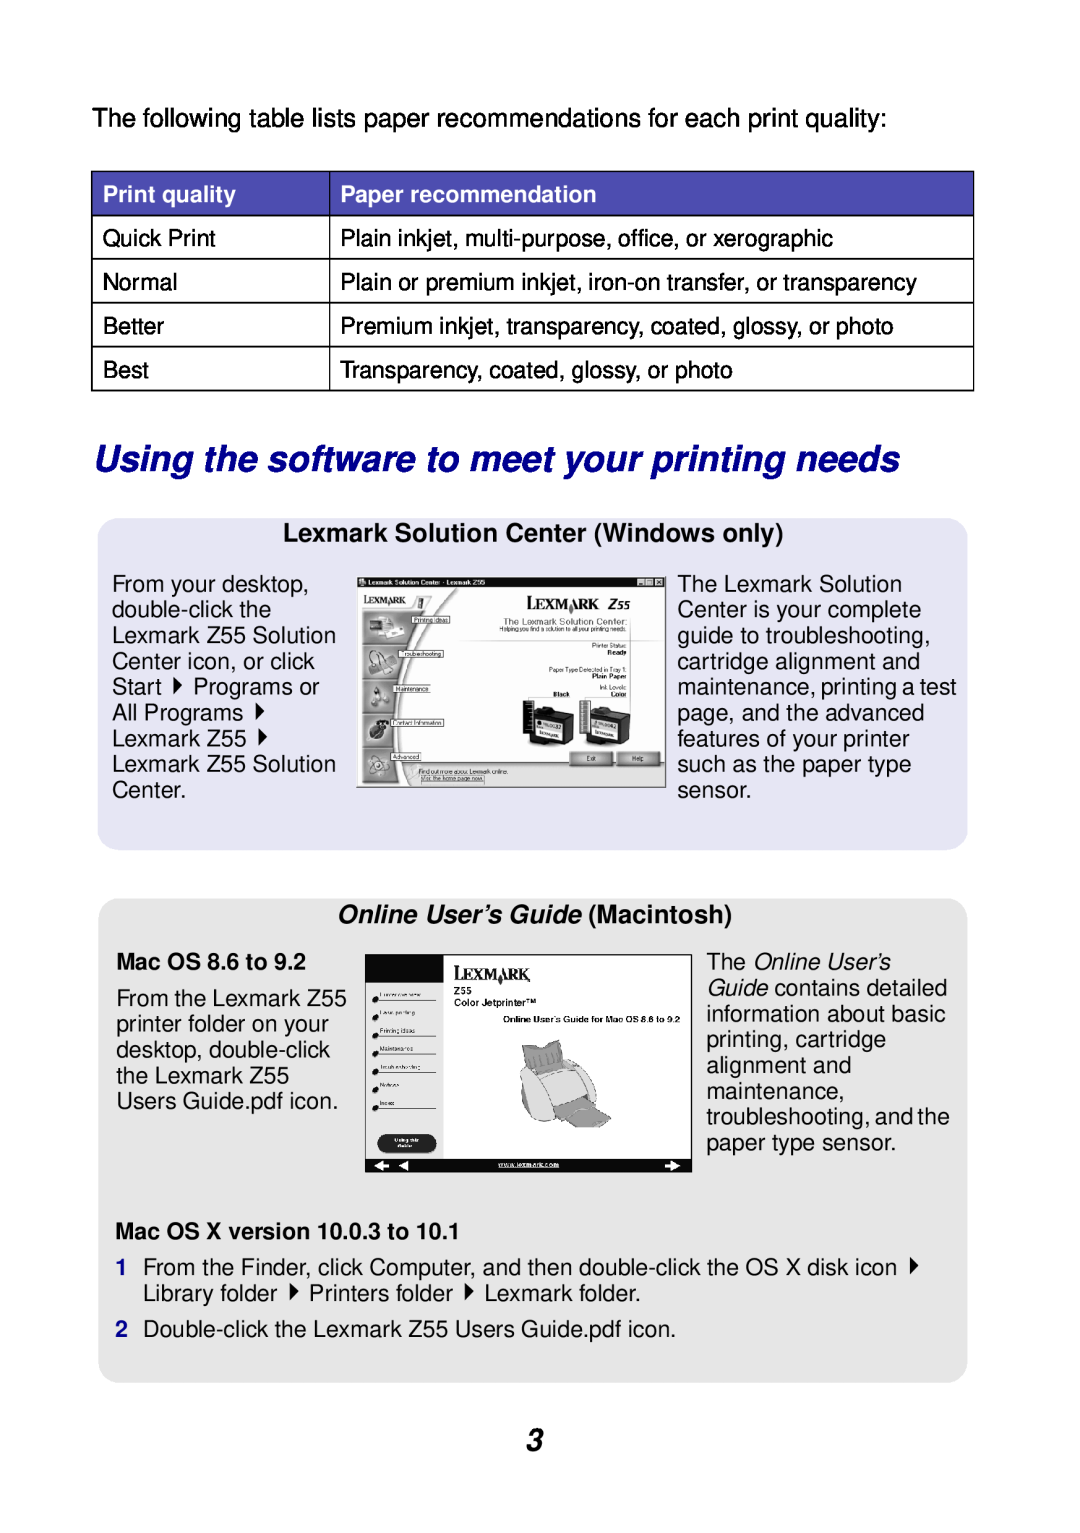 Lexmark Z55 manual Using the software to meet your printing needs, Lexmark Solution Center Windows only, Print quality 